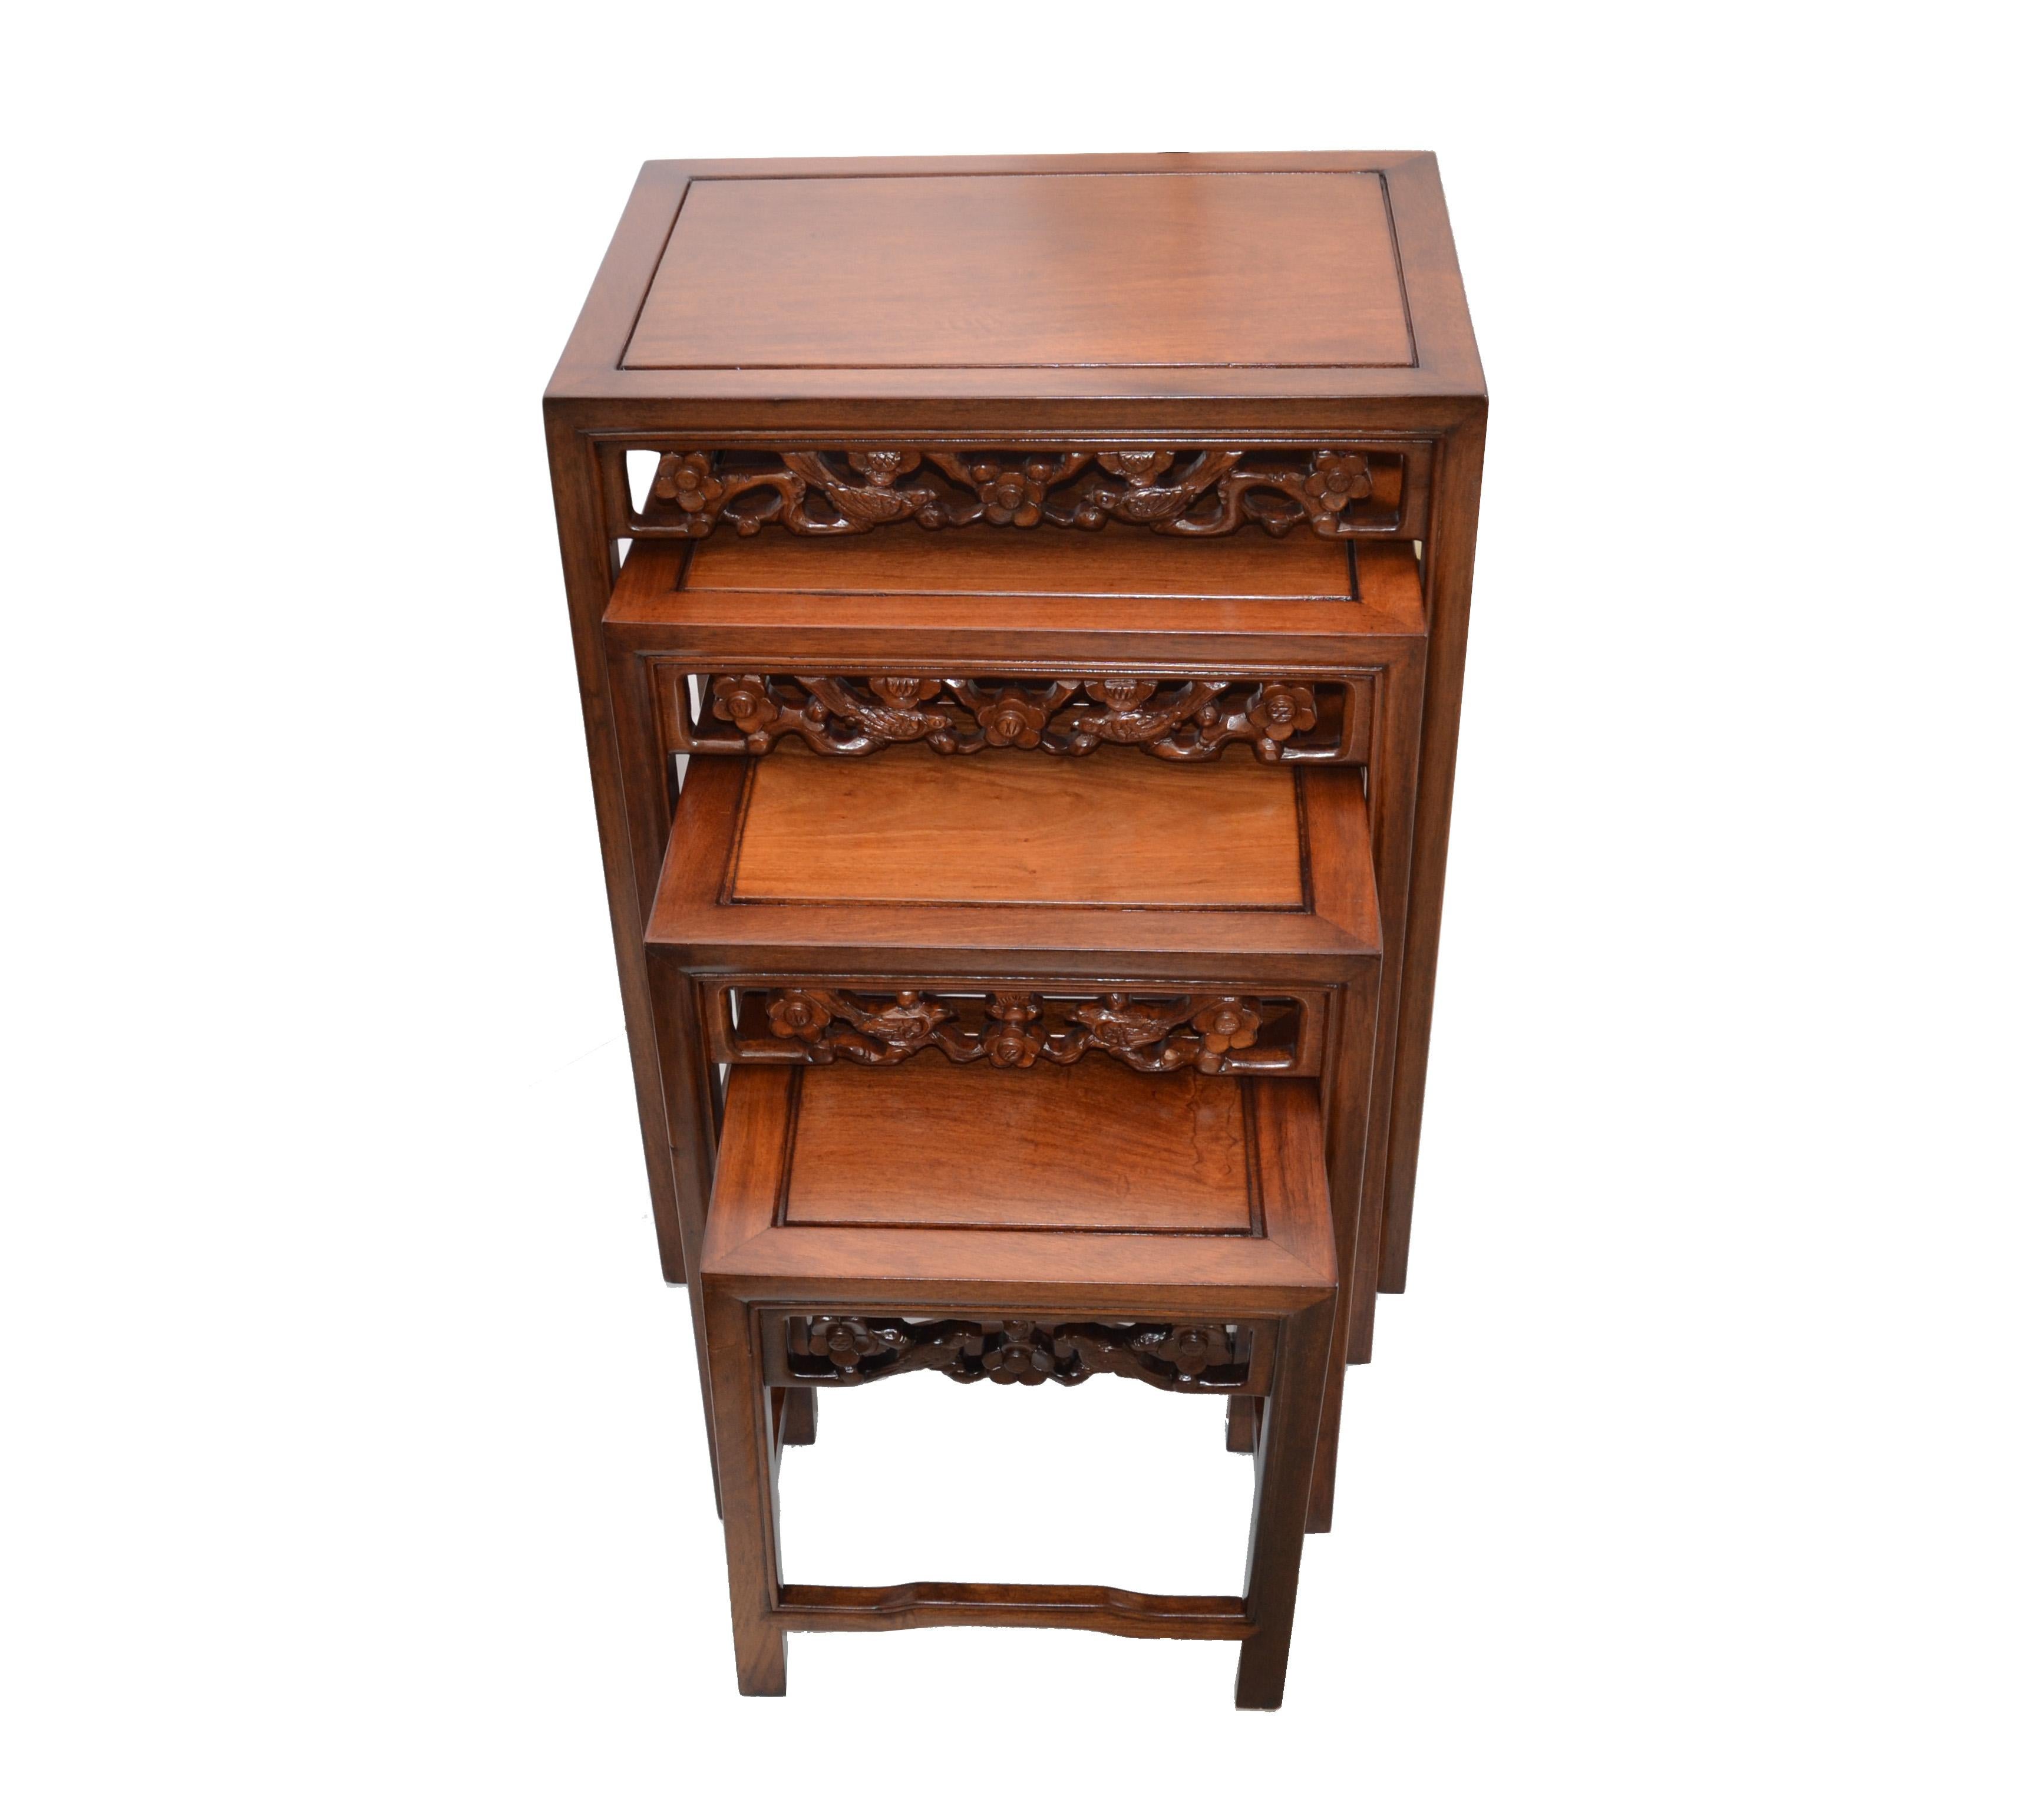 Asian Modern chinoiserie hand carved exotic wood set of 4 nesting tables or stacking tables.
Size of each table:
14.00 D x 20.0 L x 26 inches H.
12.25 D x 17.5 L x 22 inches H.
10.5 D x 15 L x 18 inches H.
8.75 D x 12.5 L x 14 inches H.